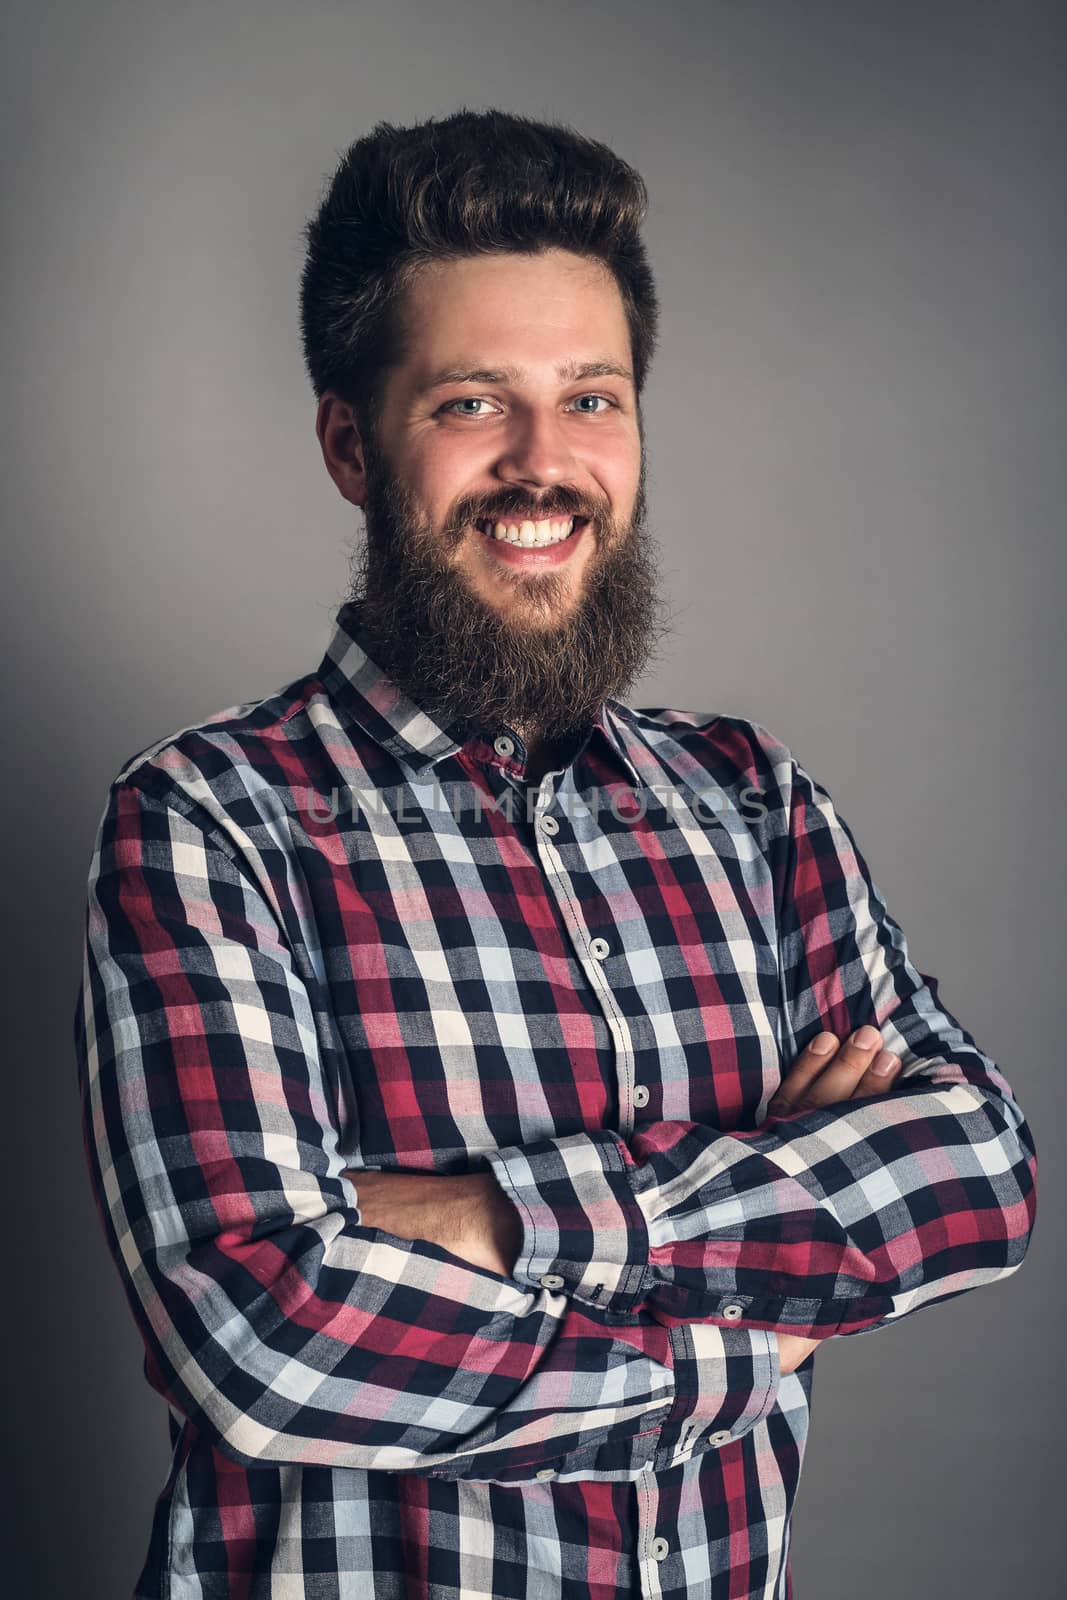 Smiling bearded man in checked shirt, portrait, studio shot on gray background